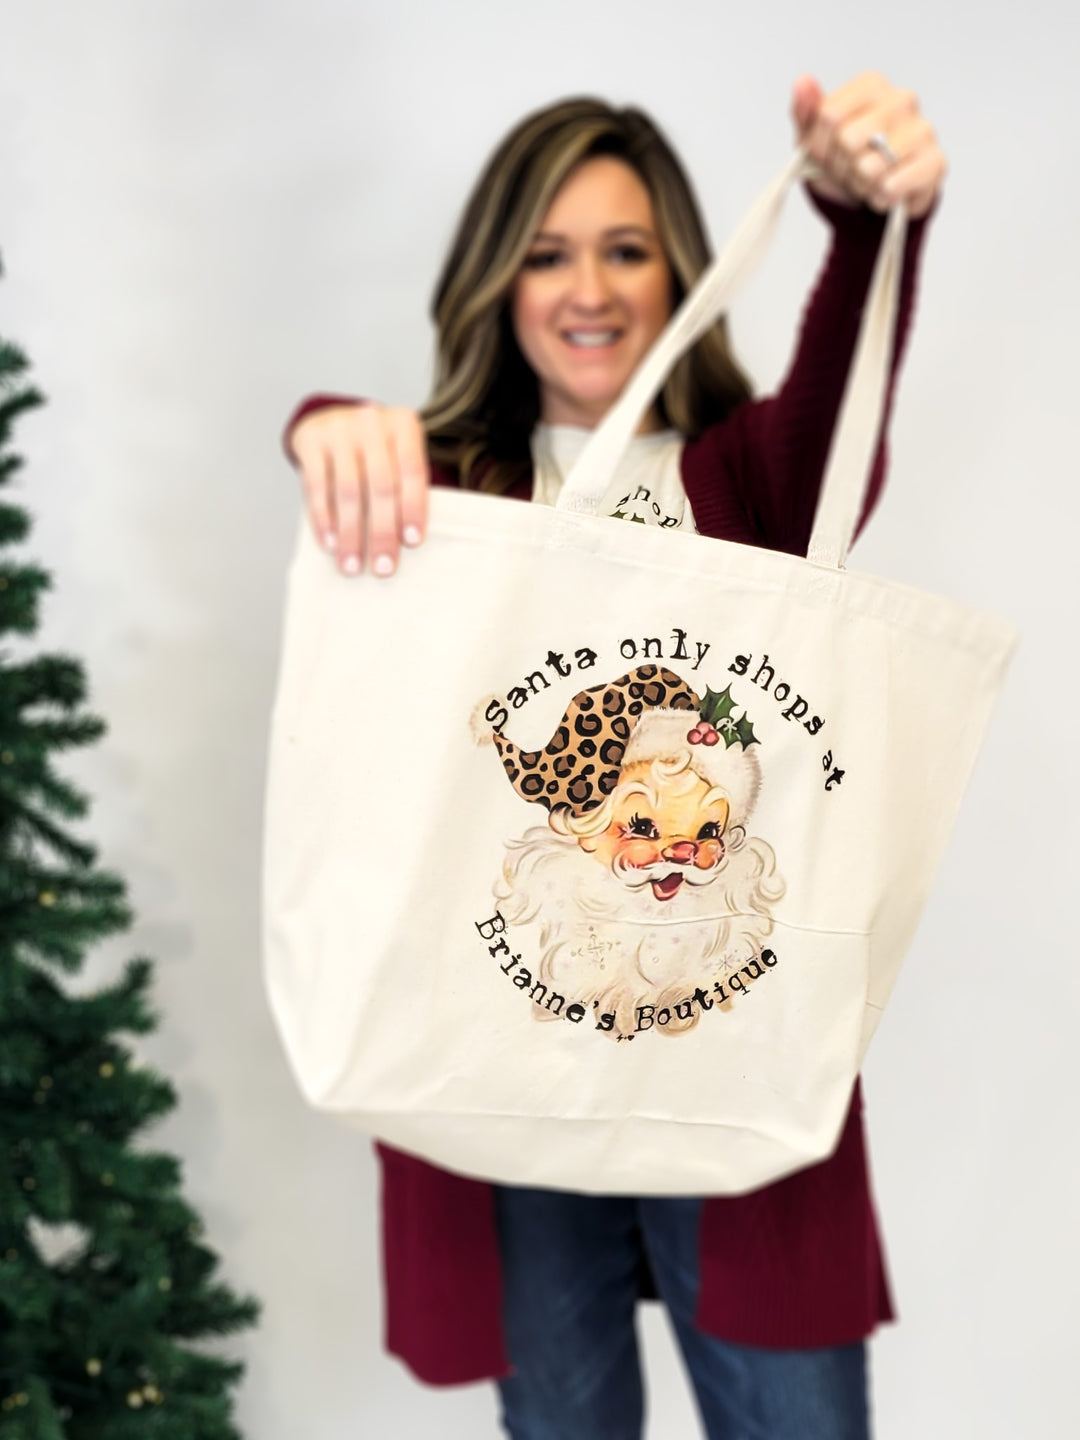 SANTA ONLY SHOPS AT BRIANNE'S BOUTIQUE TOTE BAG